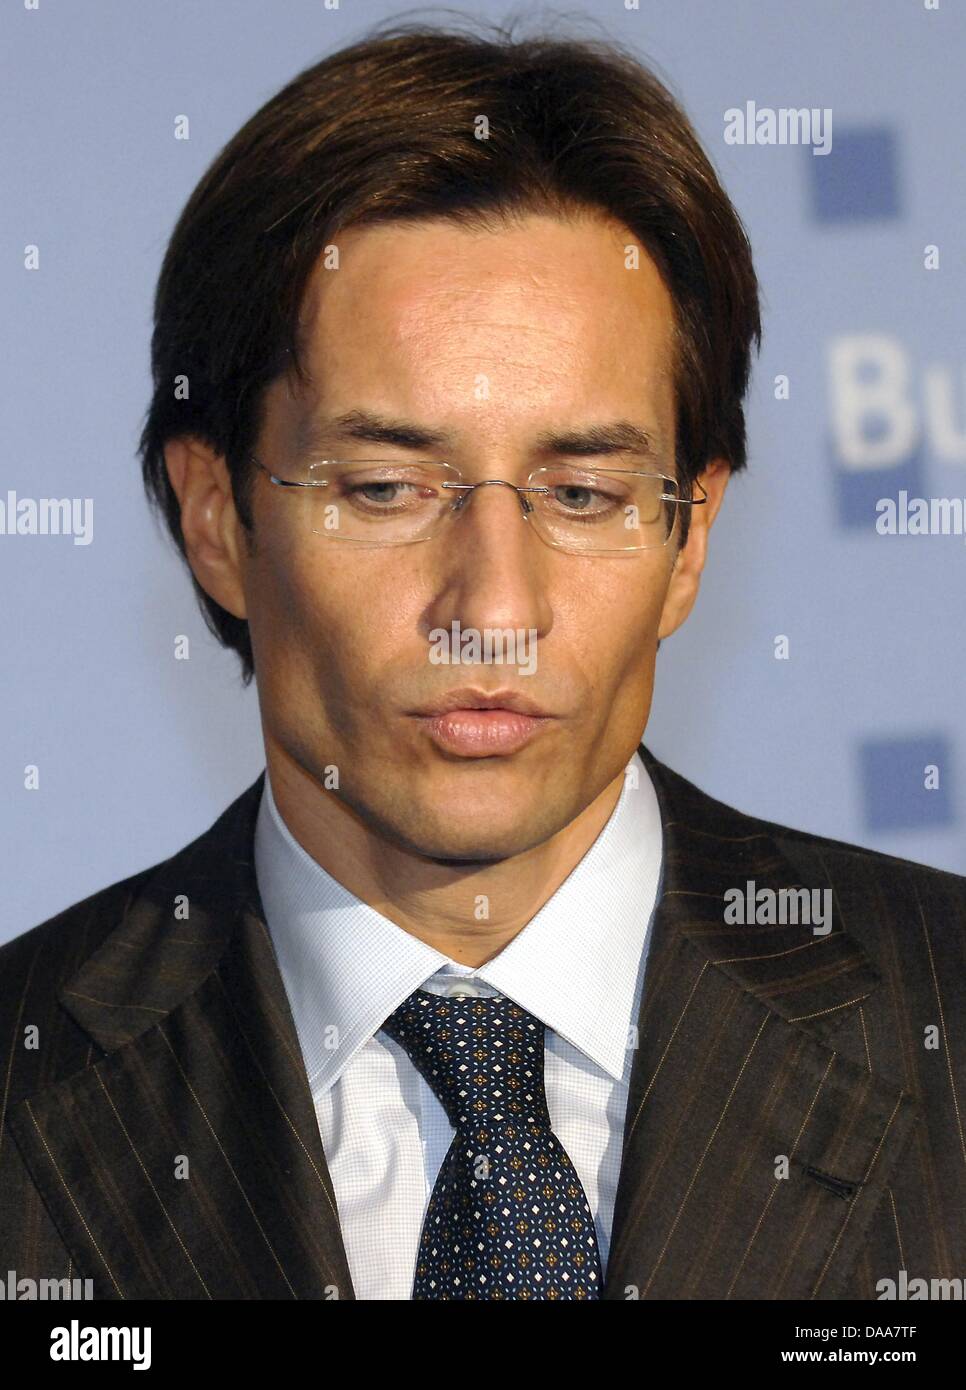 (dpa file) - A file picture dated 15 December 2005 shows Austrian finance minister Karl-Heinz Grasser pictured during a press conference in Berlin, Germany. Grasser has become a target for tax investors. While the public prosecution departments confirmed on 13 January 2011 that a criminal proceeding concerning tax matters was initiated, Grasser regards himself to be exposed to a ca Stock Photo